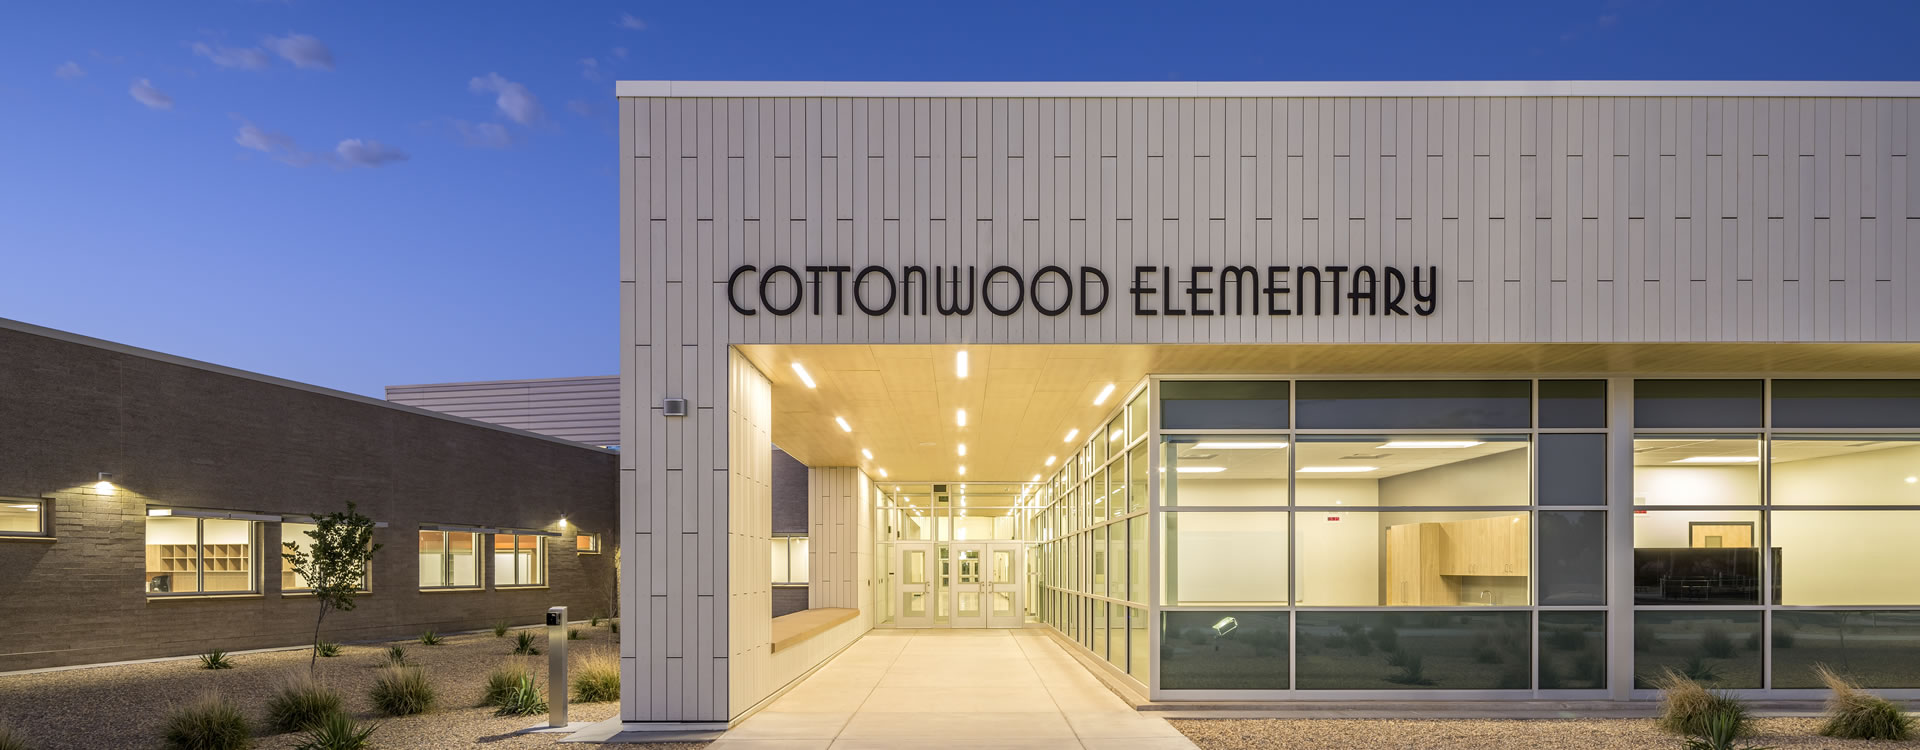 cottonwood elementary - front office